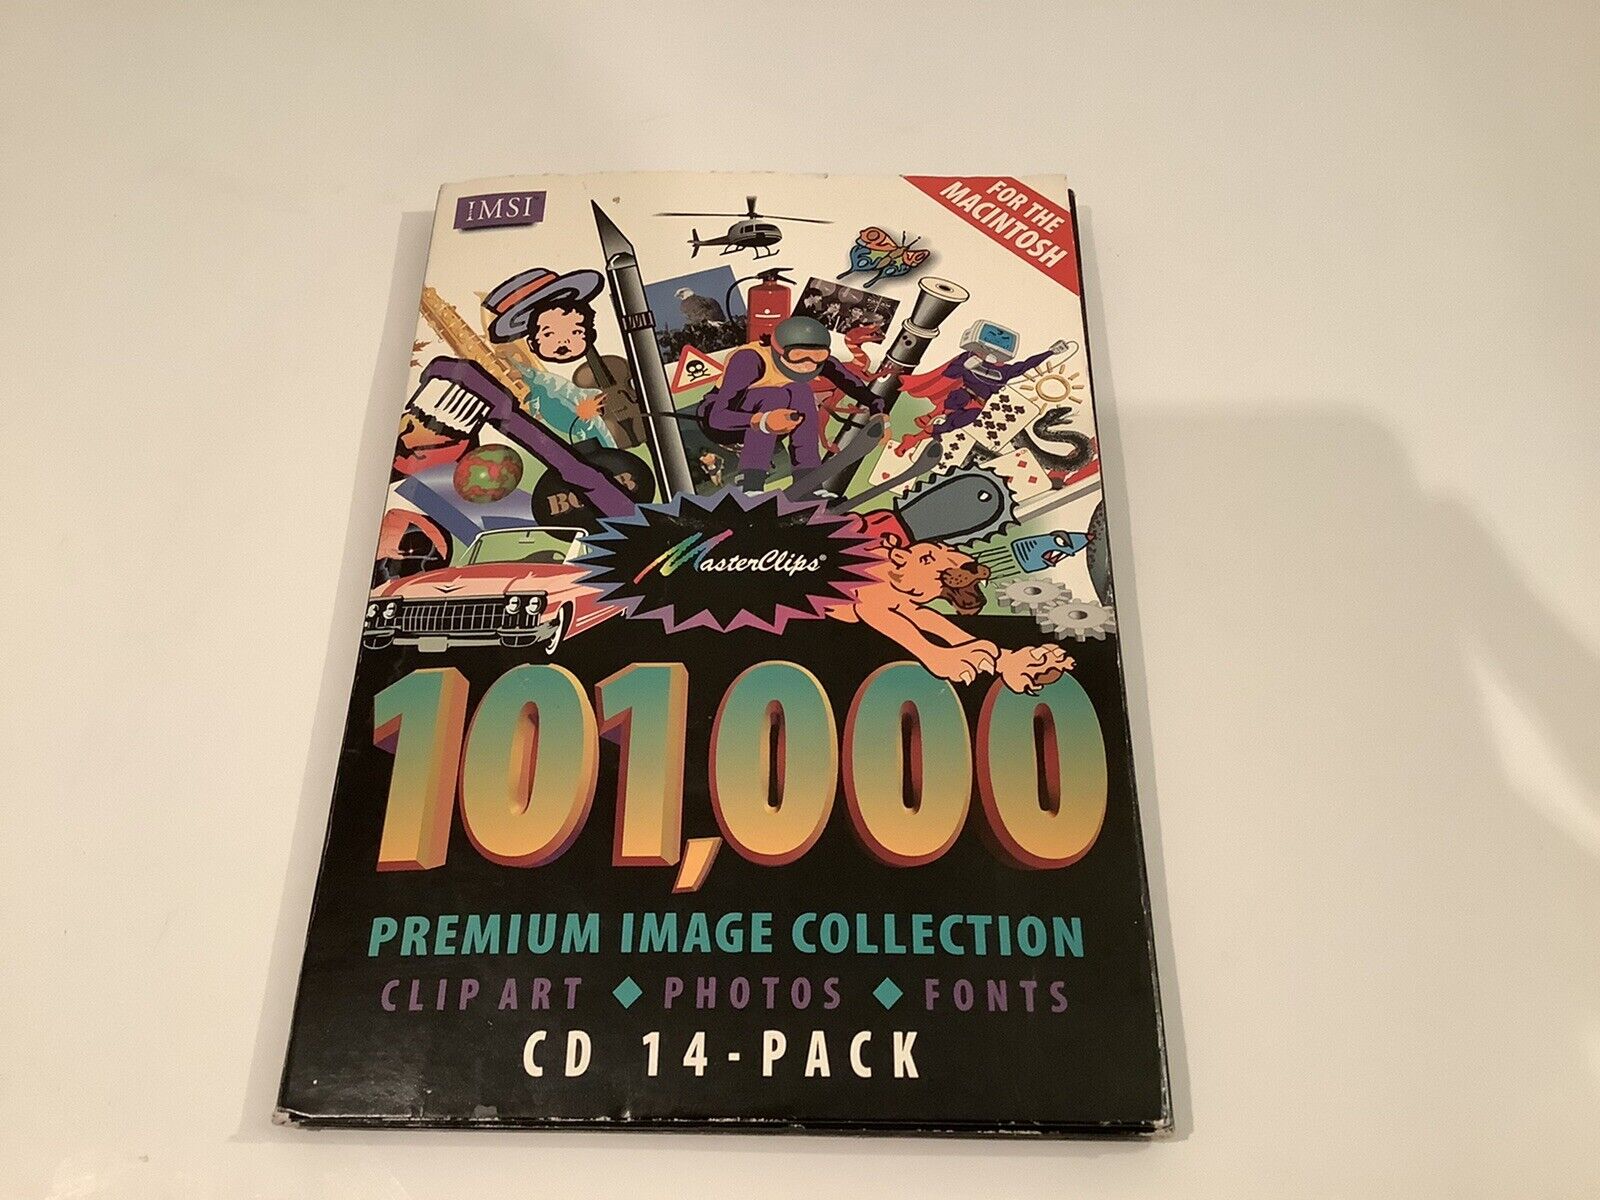 MASTERCLIPS 101,000 PREMIUM IMAGE COLLECTION CD 14 PACK FOR MACINTOSH